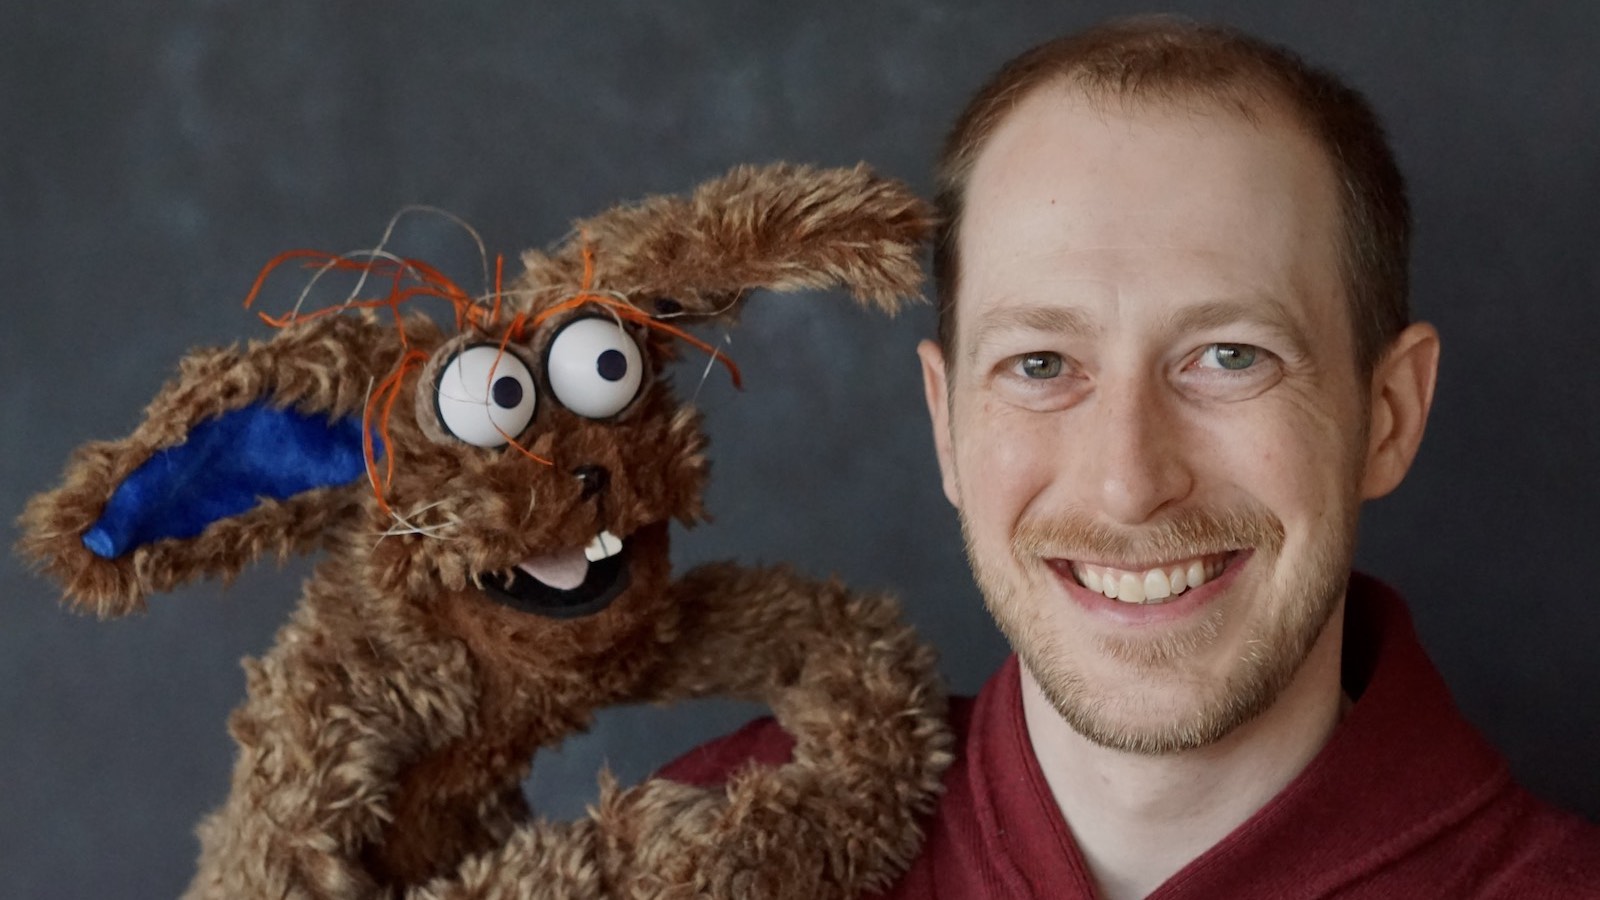 Puppeteer Brian Carson smiles at camera in closeup next to his puppet, the brown rabbit Silly Willy looking at him